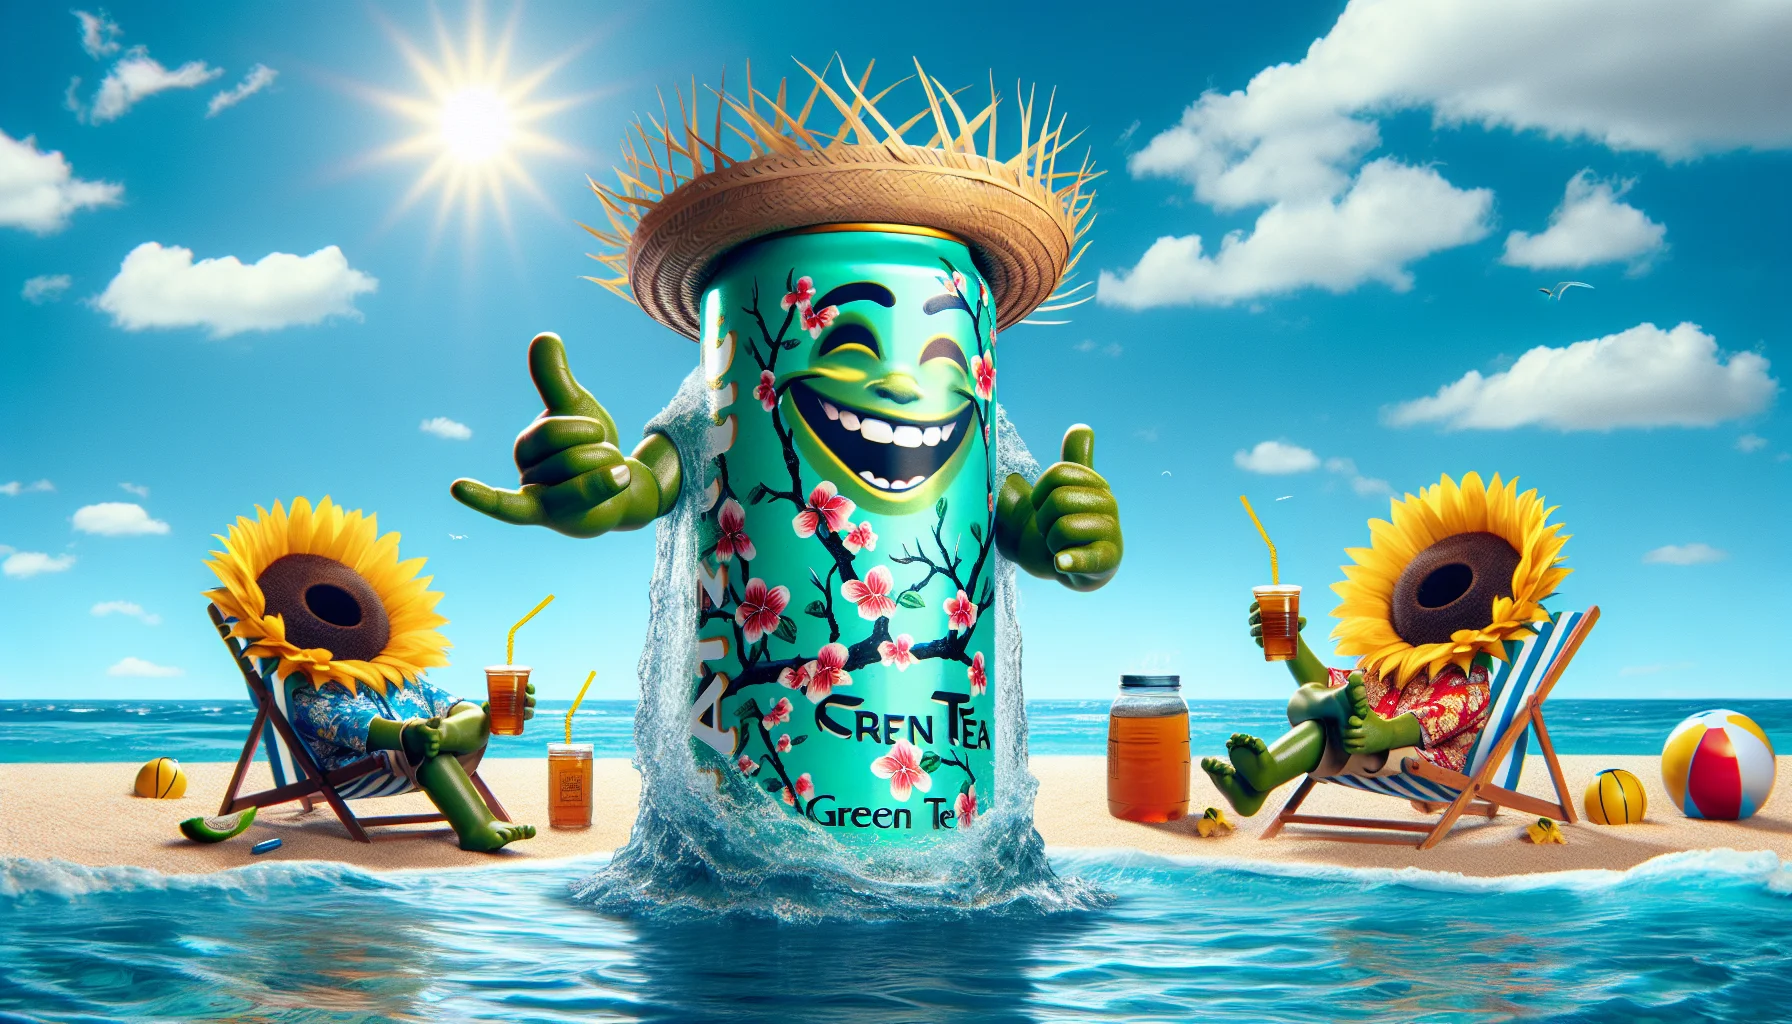 Create a humorous and enticing scenario featuring a large can of Arizona Green Tea. The can is anthropomorphized, wearing a pair of sunglasses and doing a cool surfer 'hang loose' gesture with one hand. It's riding a wave of refreshing liquid tea in a crystal clear ocean under a brilliant summer sun. Laughing sunflowers dressed in Hawaiian shirts and straw hats are lounging on beach chairs, sipping from straws directly attached to mini cans of Arizona Green Tea. The atmosphere should evoke fun, relaxation, and the refreshing nature of Arizona Green Tea.